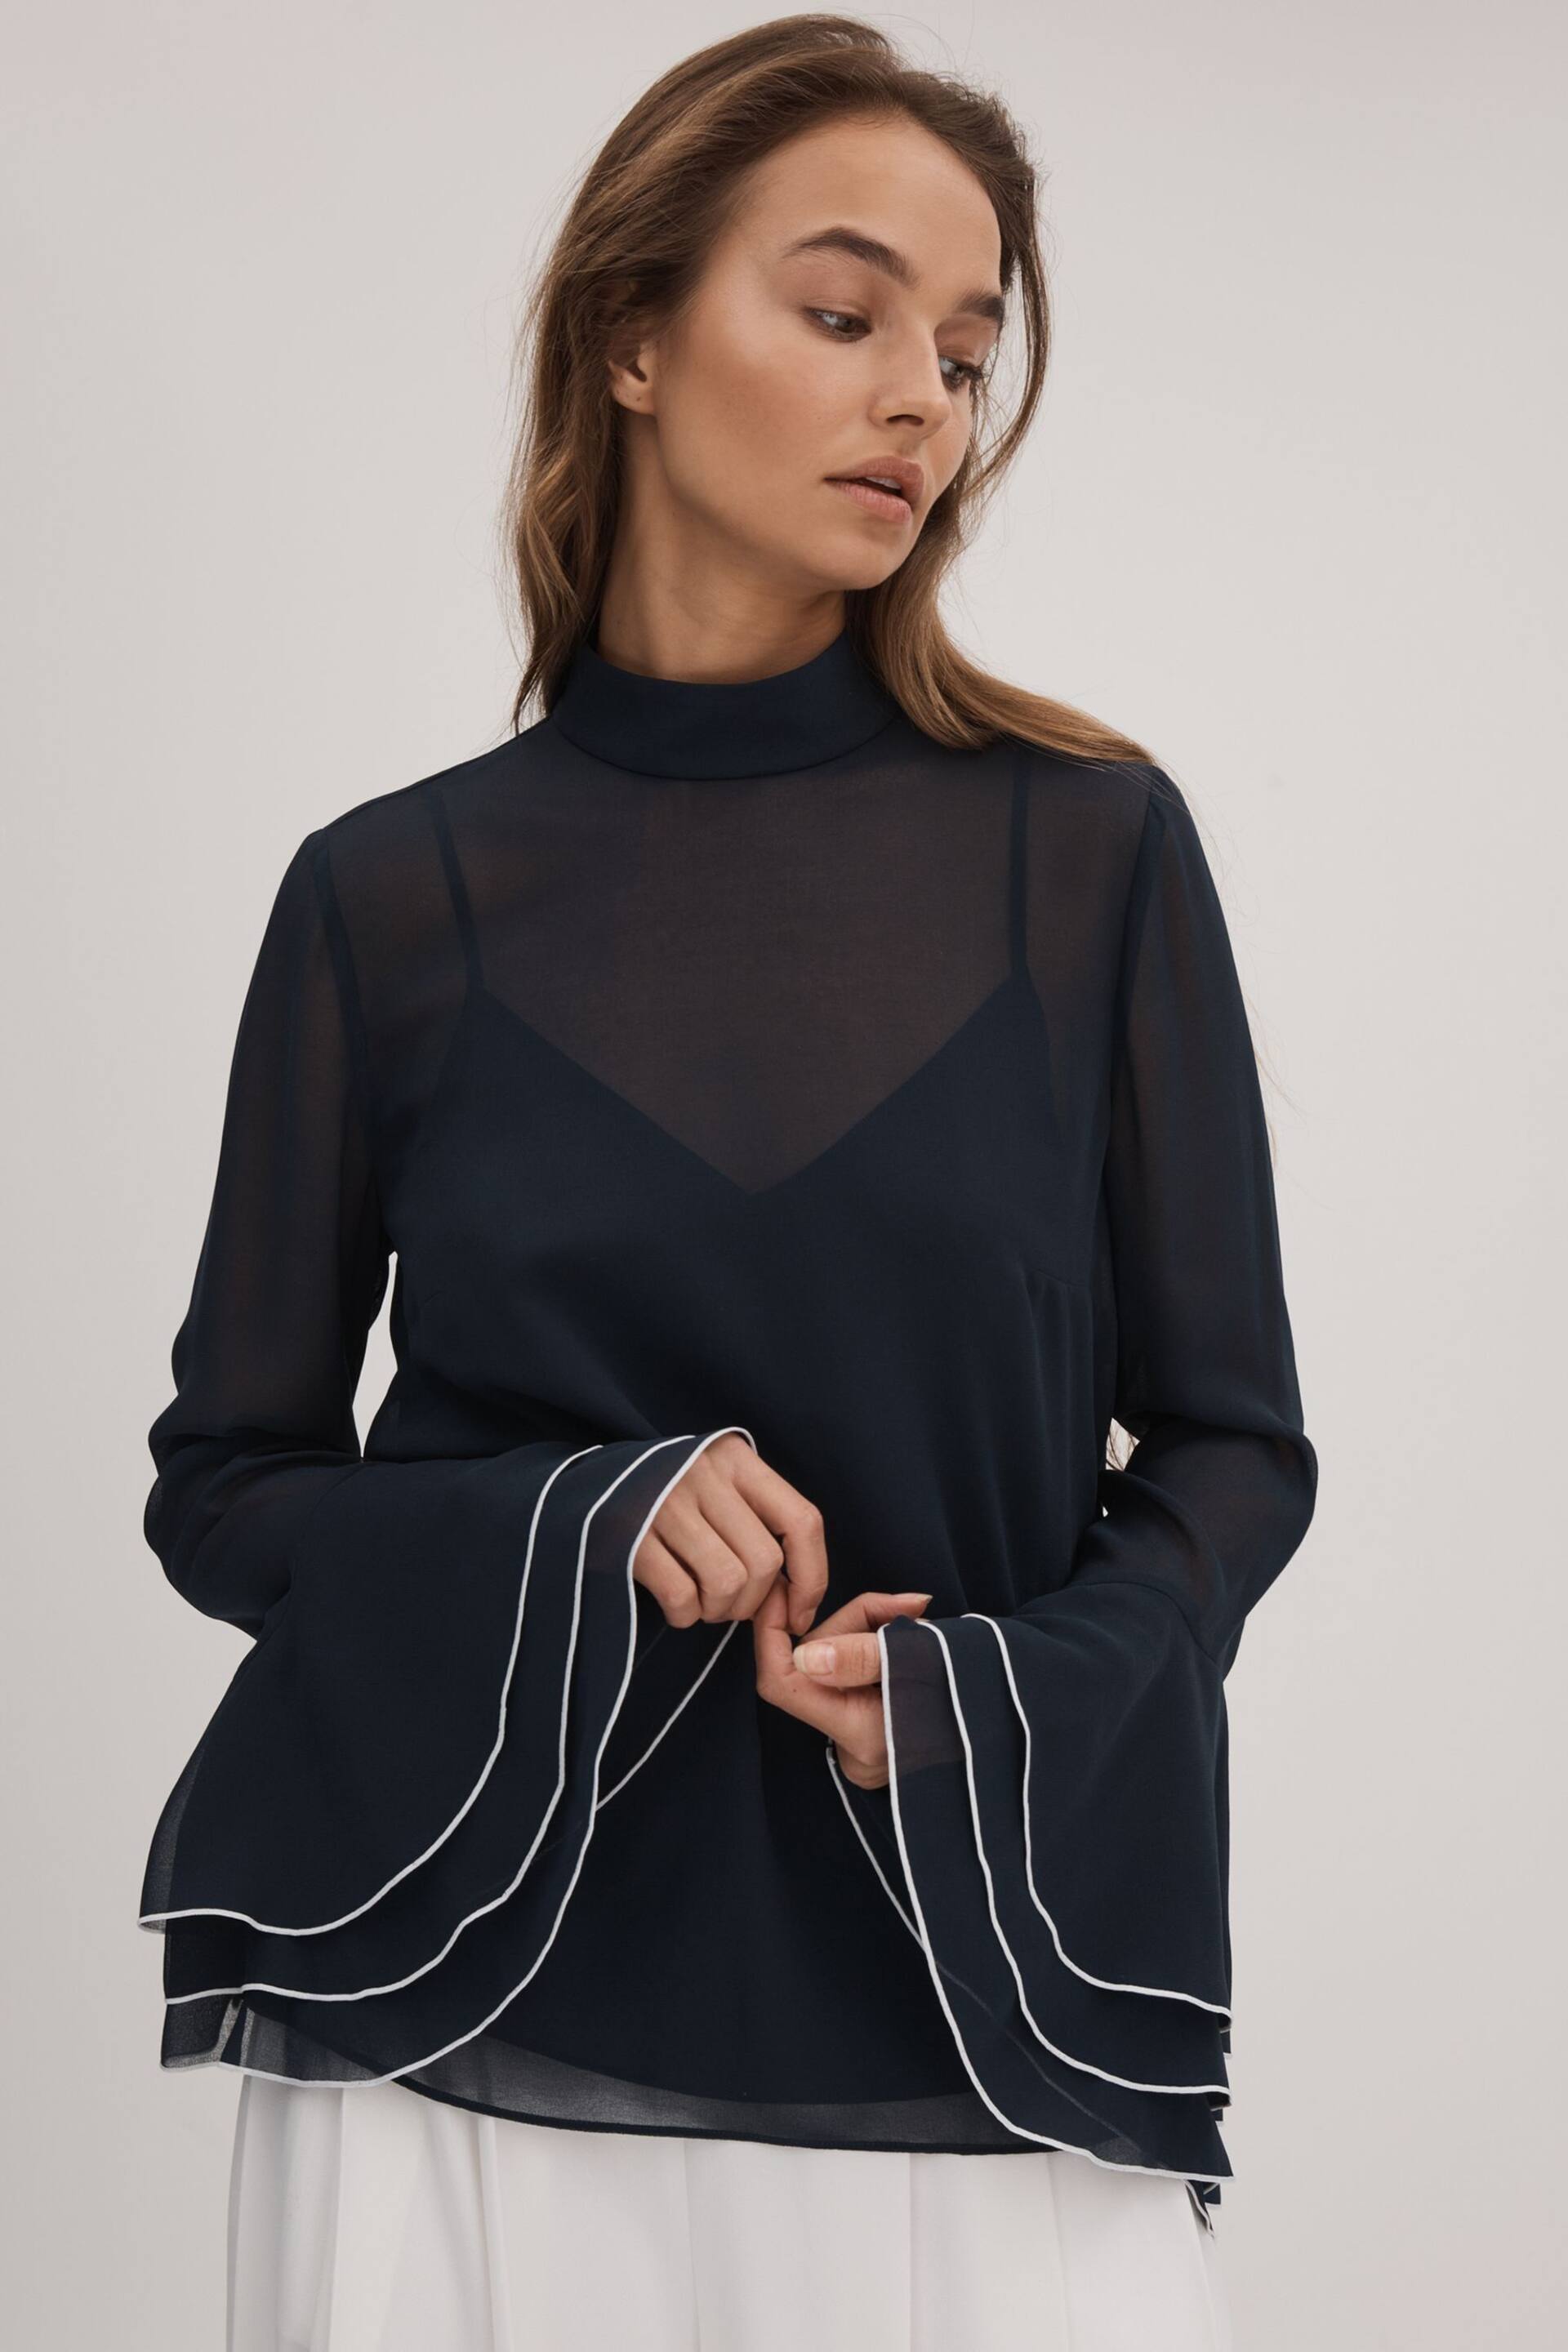 Florere Fluted Cuff Blouse - Image 1 of 7